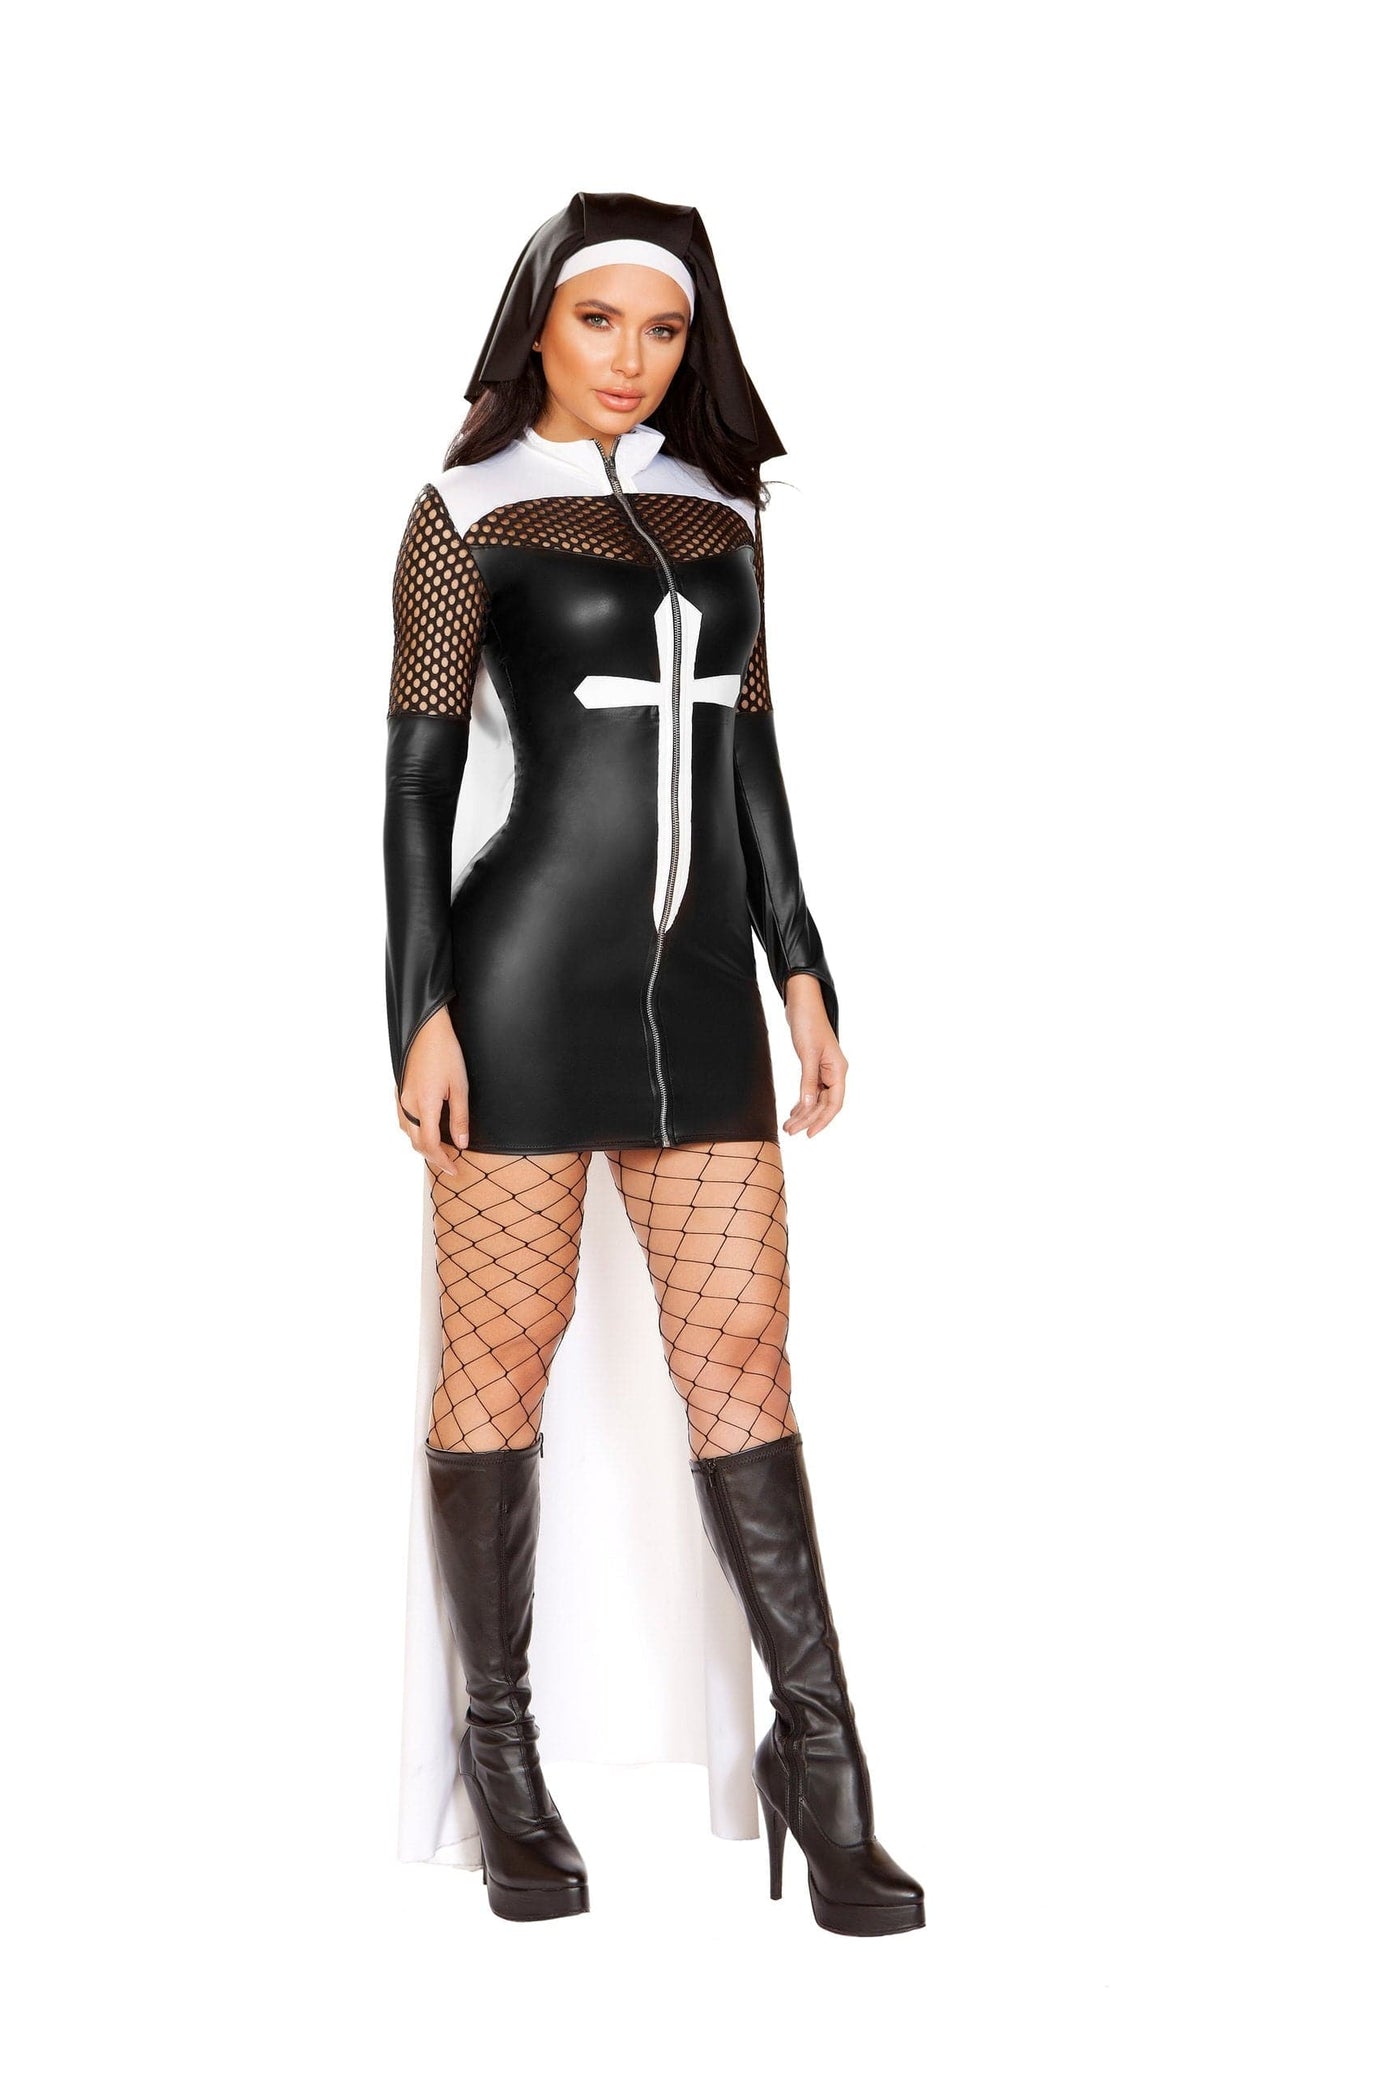 2pc. Nun of the Above Women's Costume - For Love of Lingerie